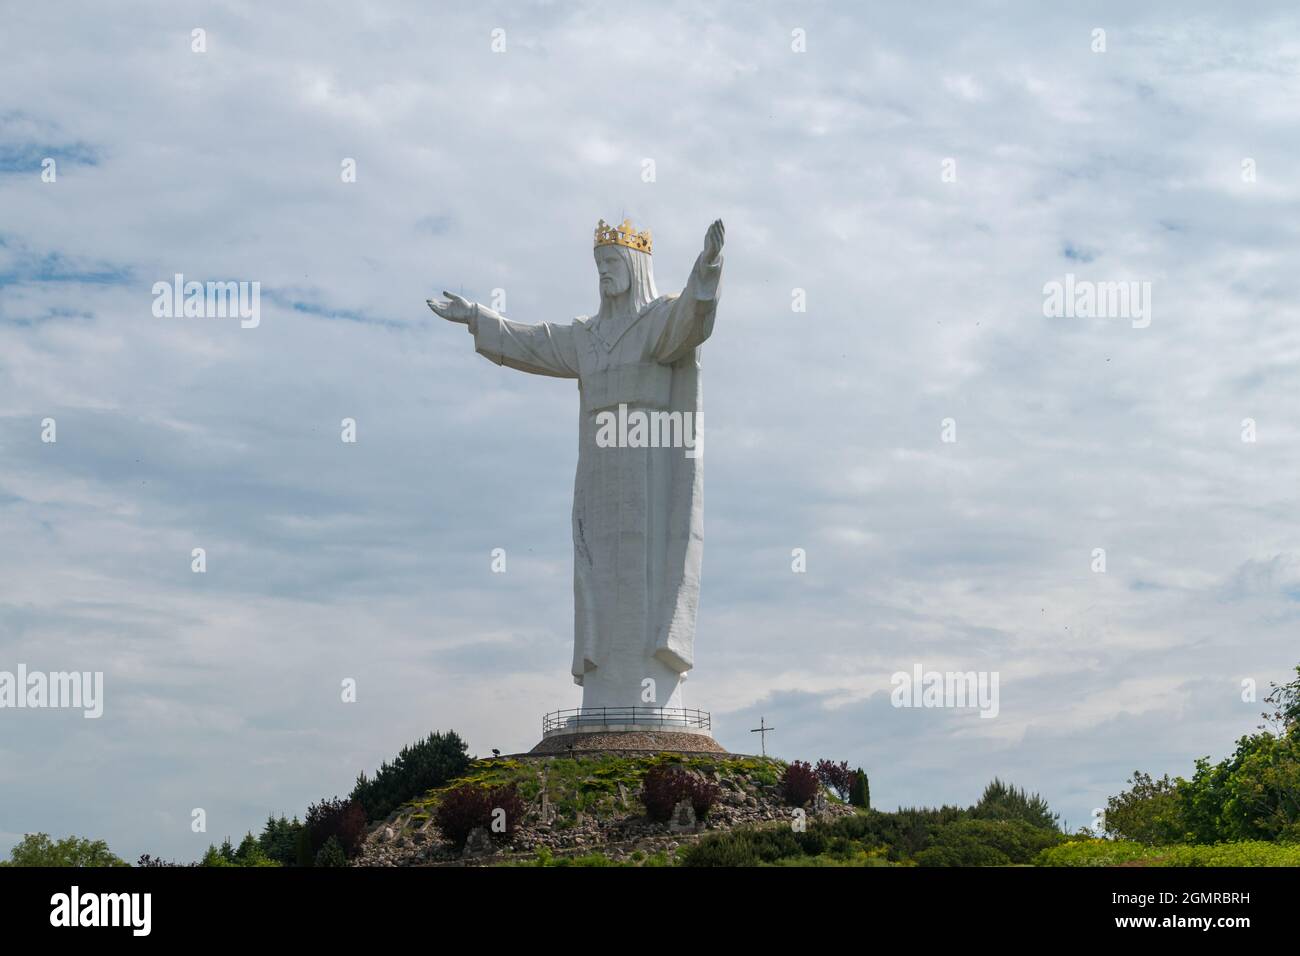 Swiebodzin, Poland - June 1, 2021: The largest figure of Christ the King in the world. Stock Photo